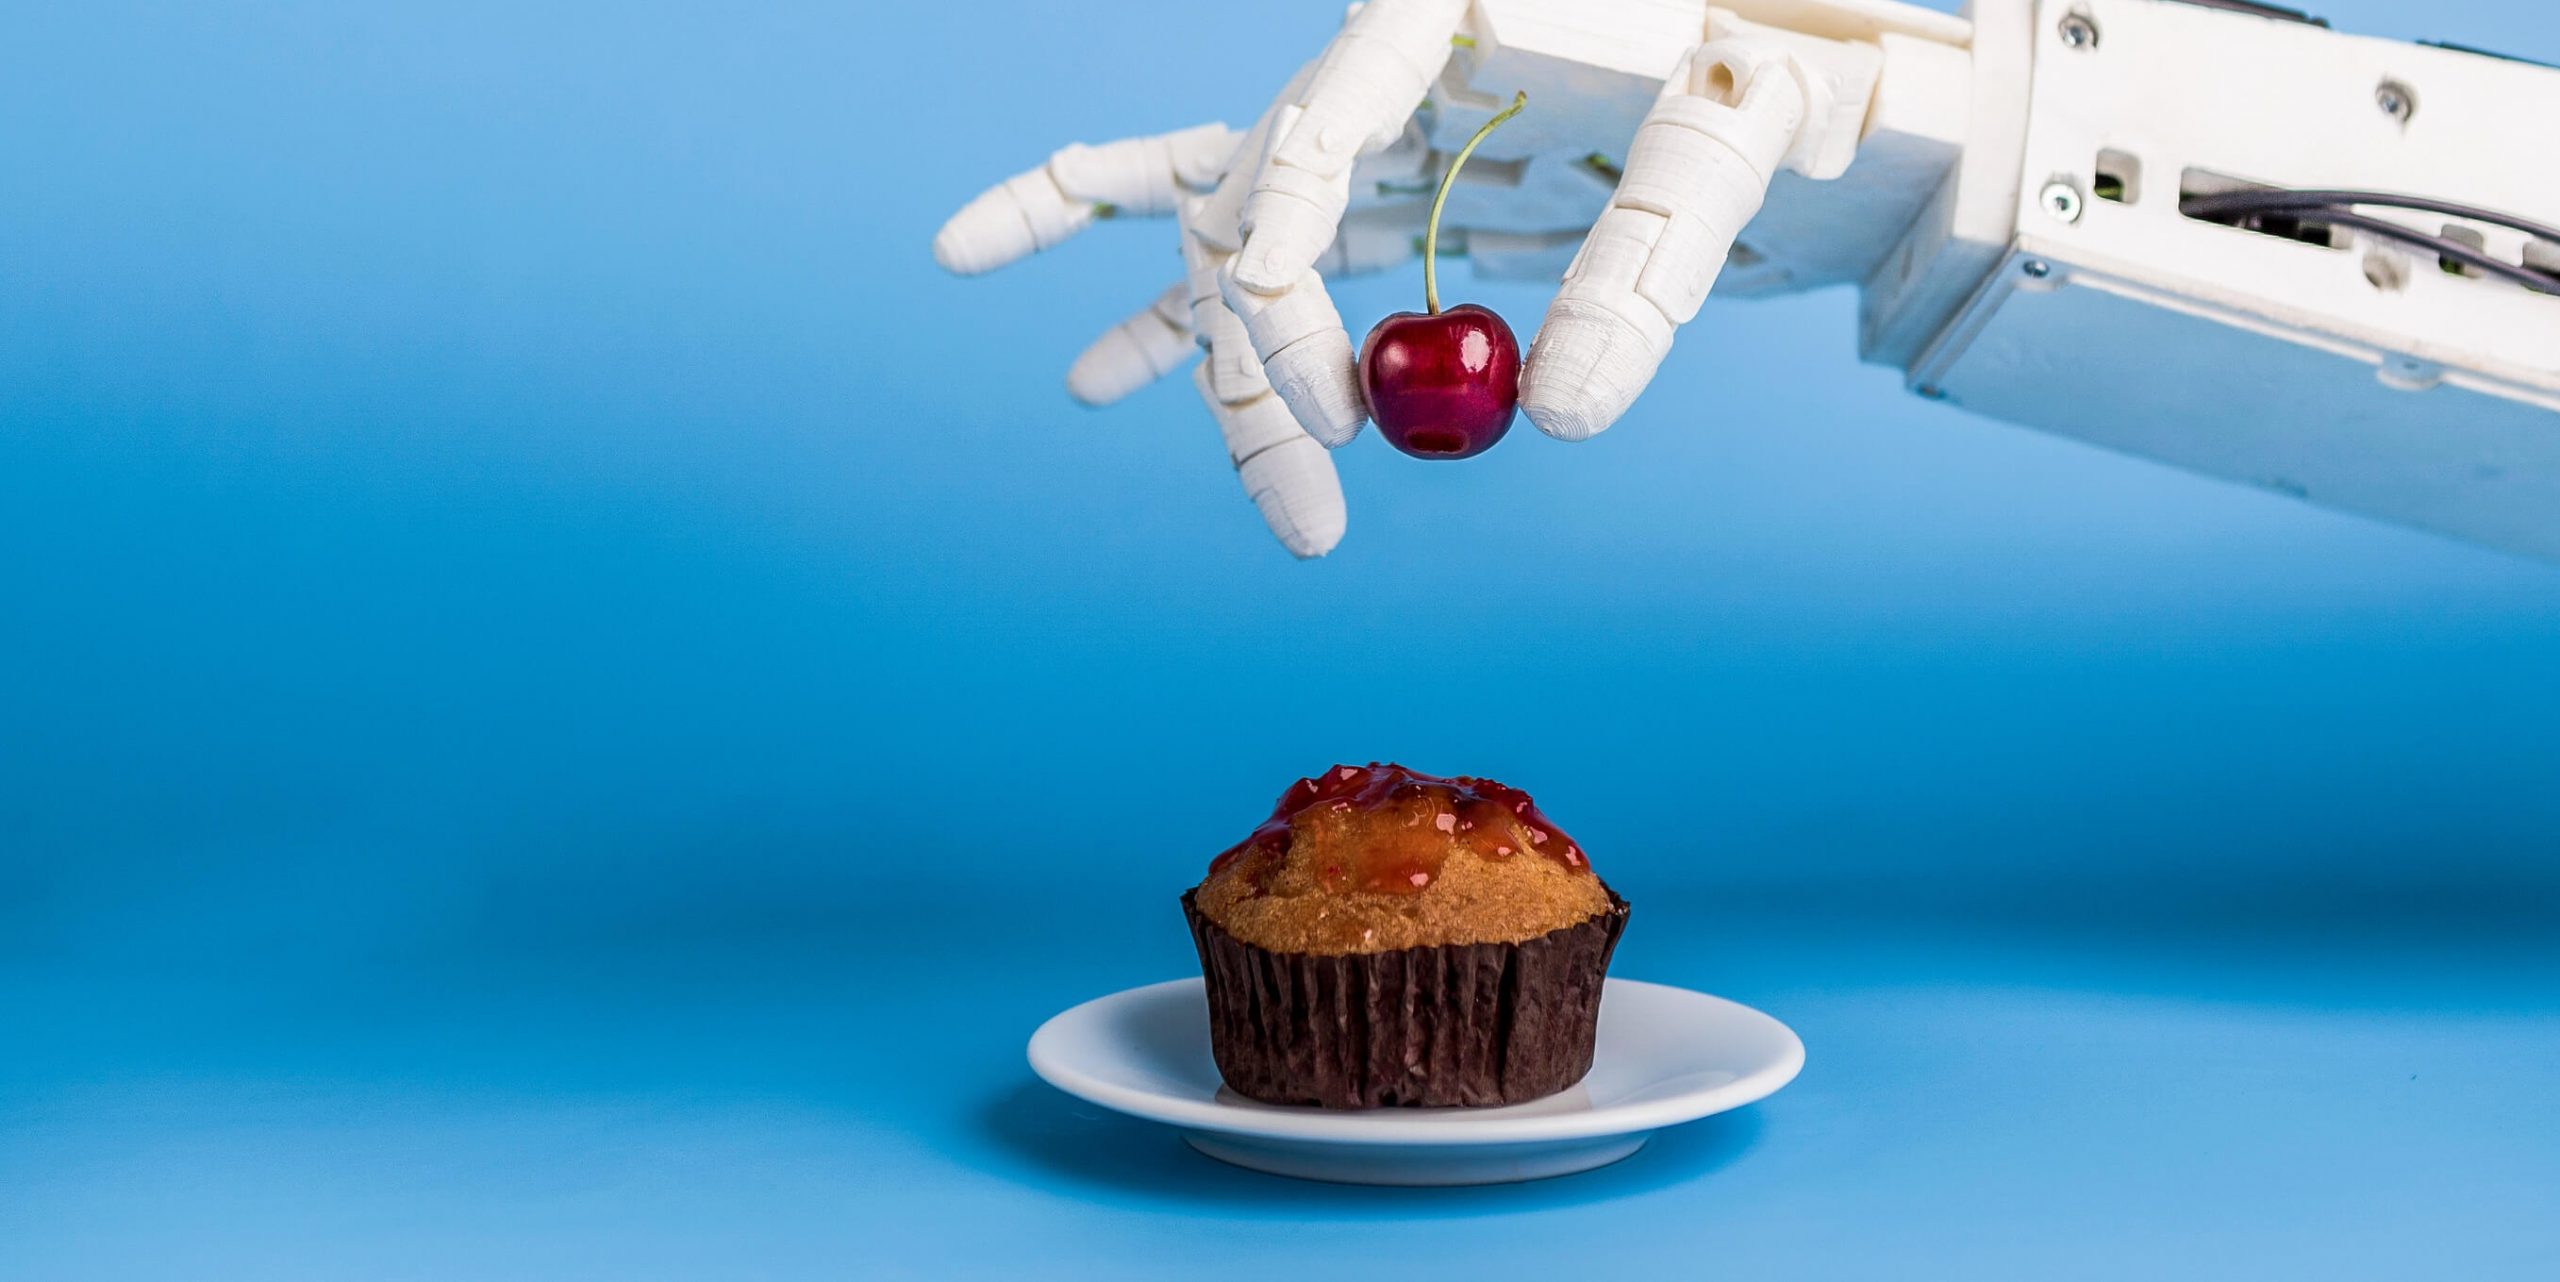 Automation and the use of robots in gastronomy become reality 